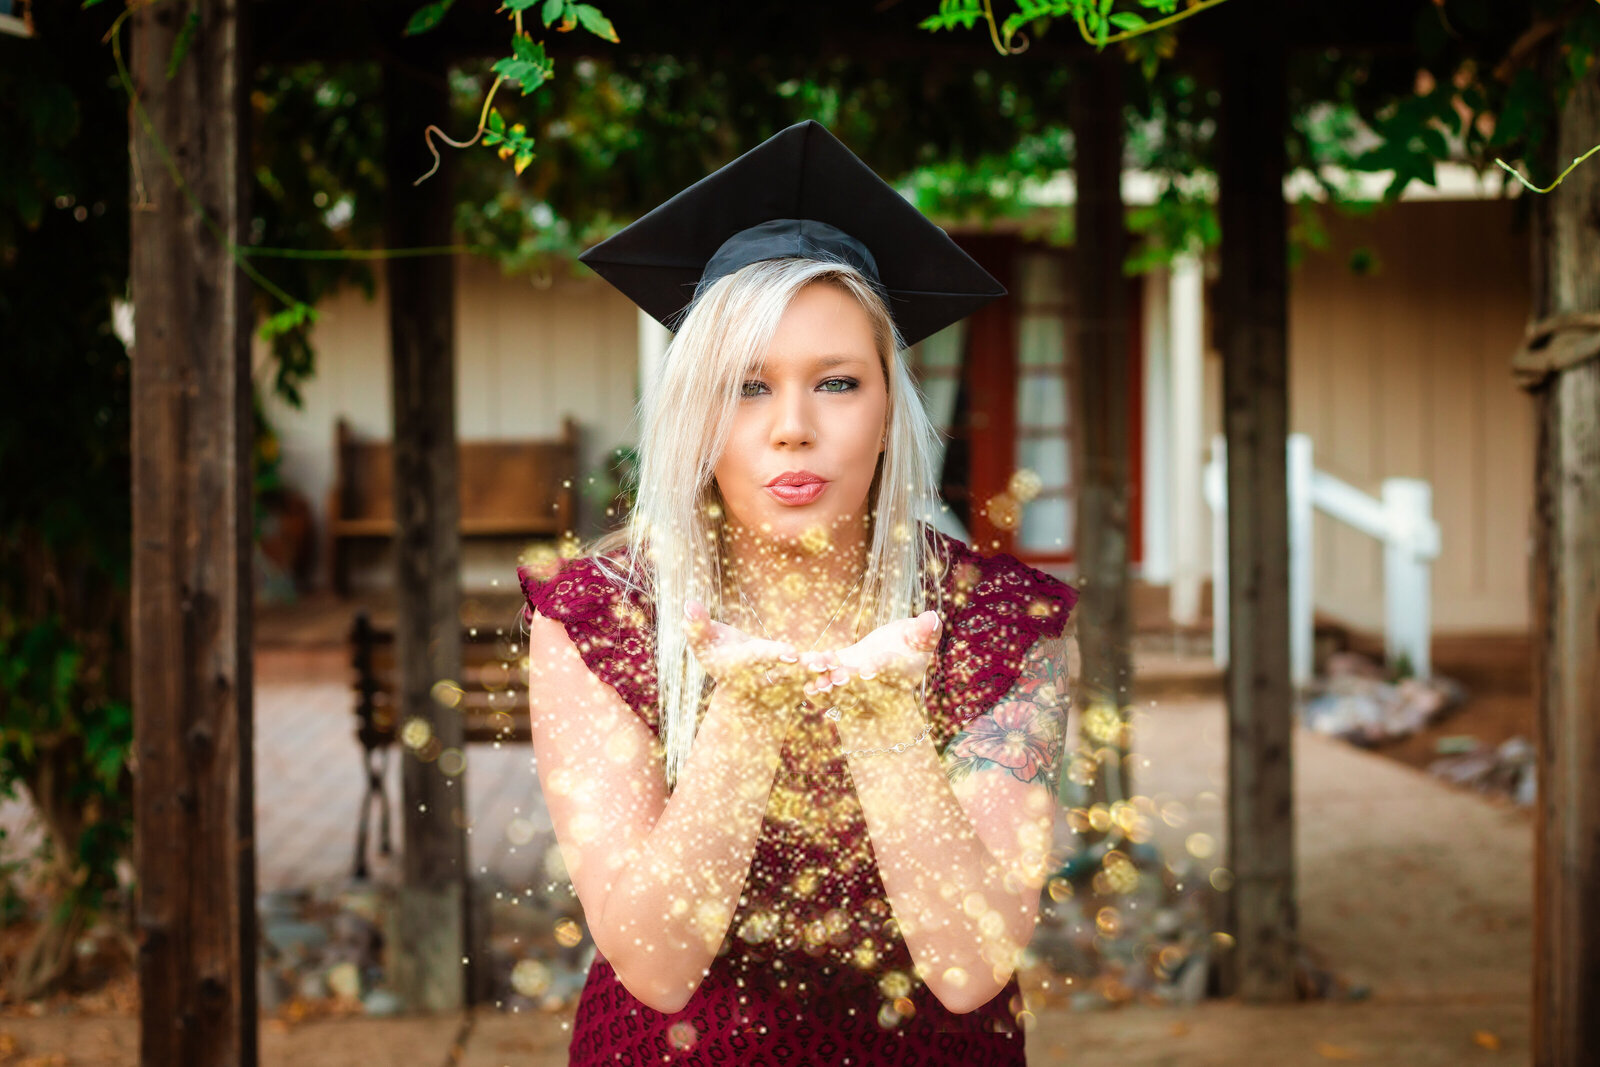 Family Photographer, a graduate woman blows glitter into the air from her hands